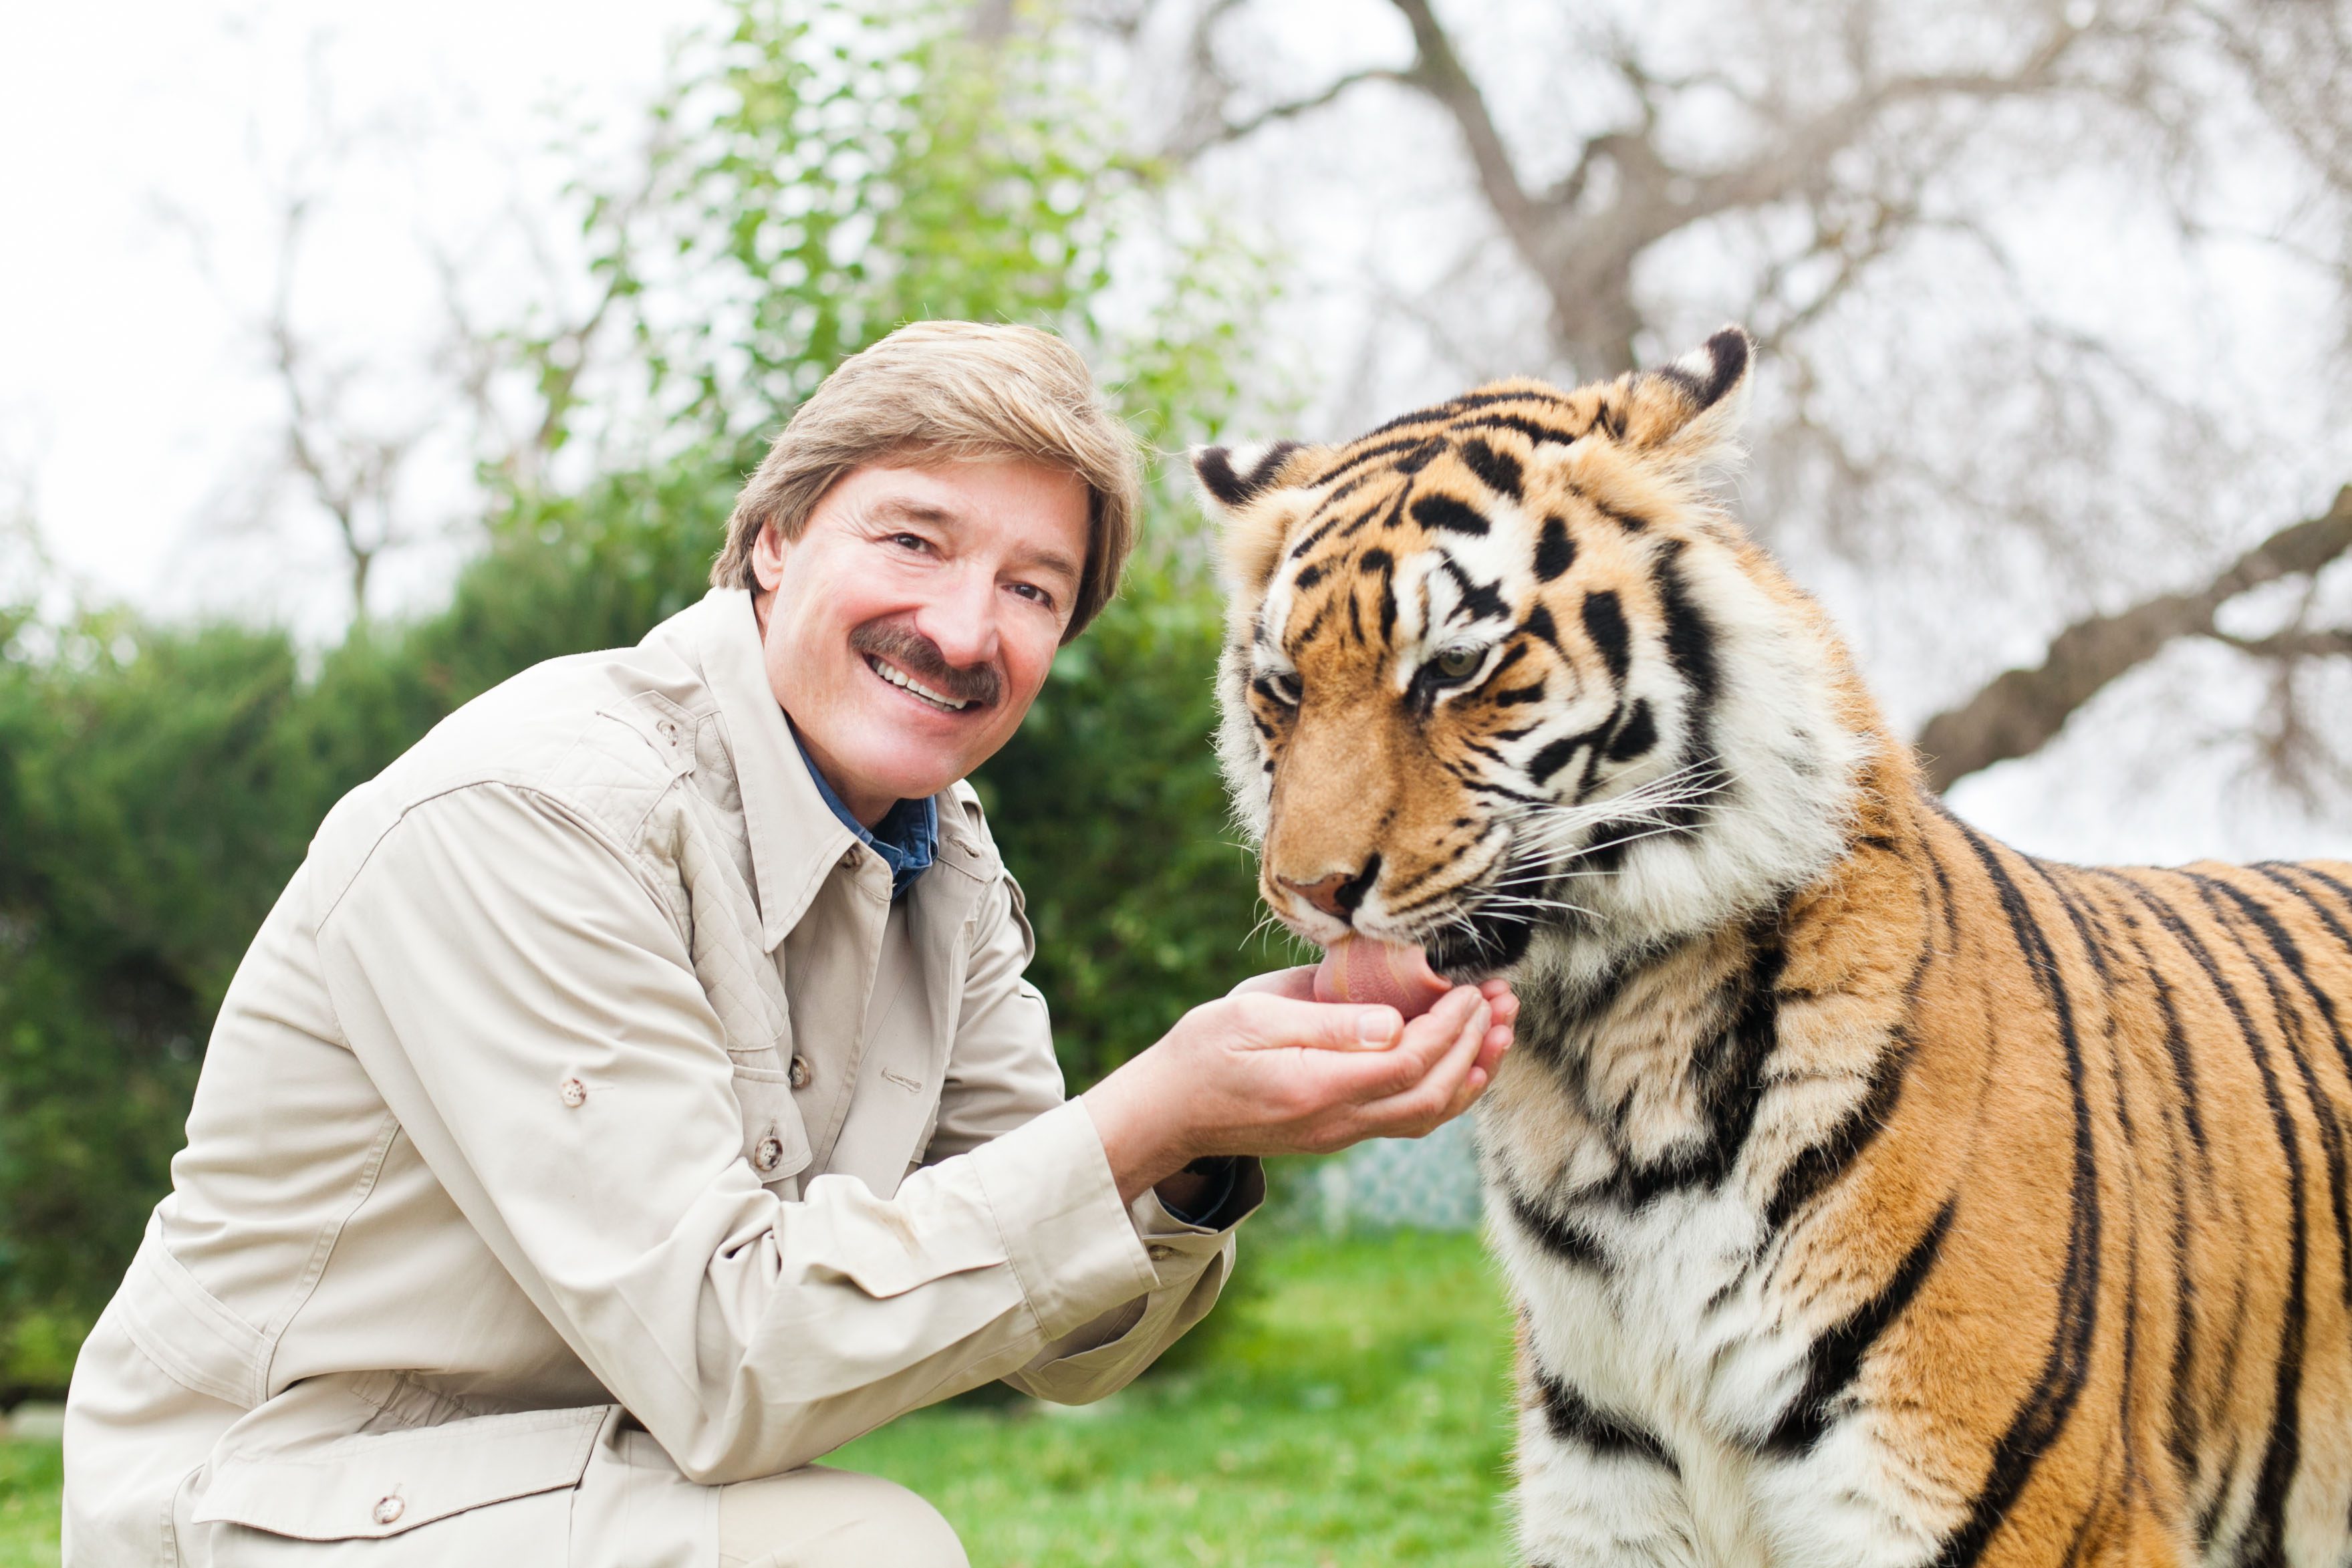 UCSB Arts & Lectures presents wildlife educator Peter Gros on Oct. 9